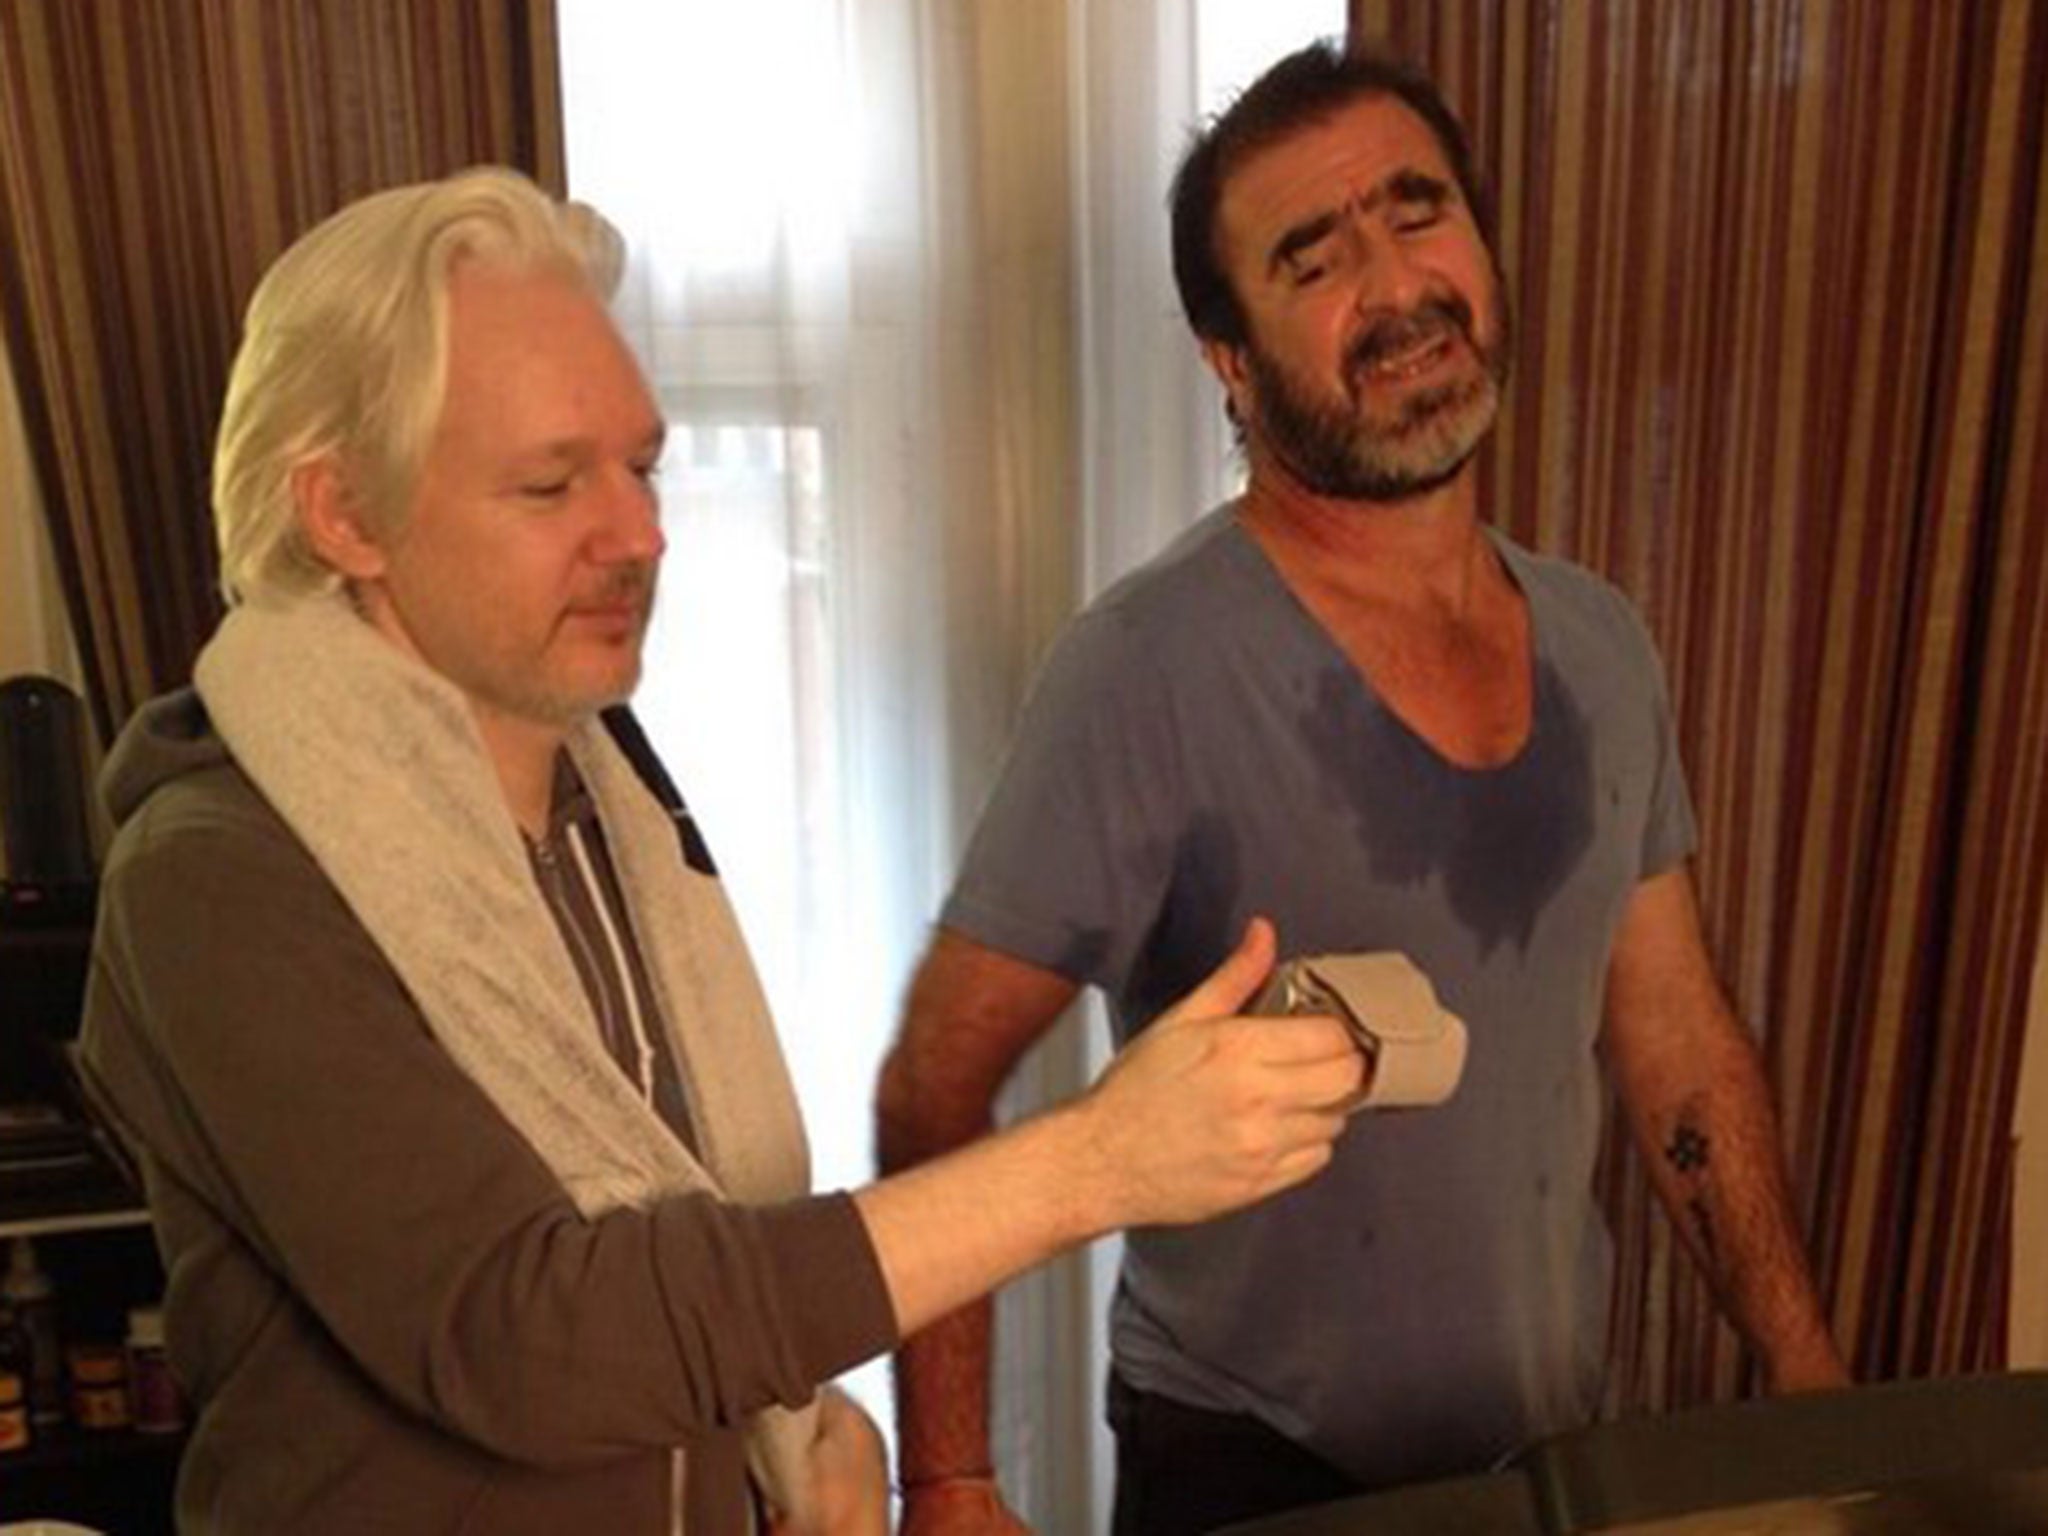 Julian Assange working out with Eric Cantona